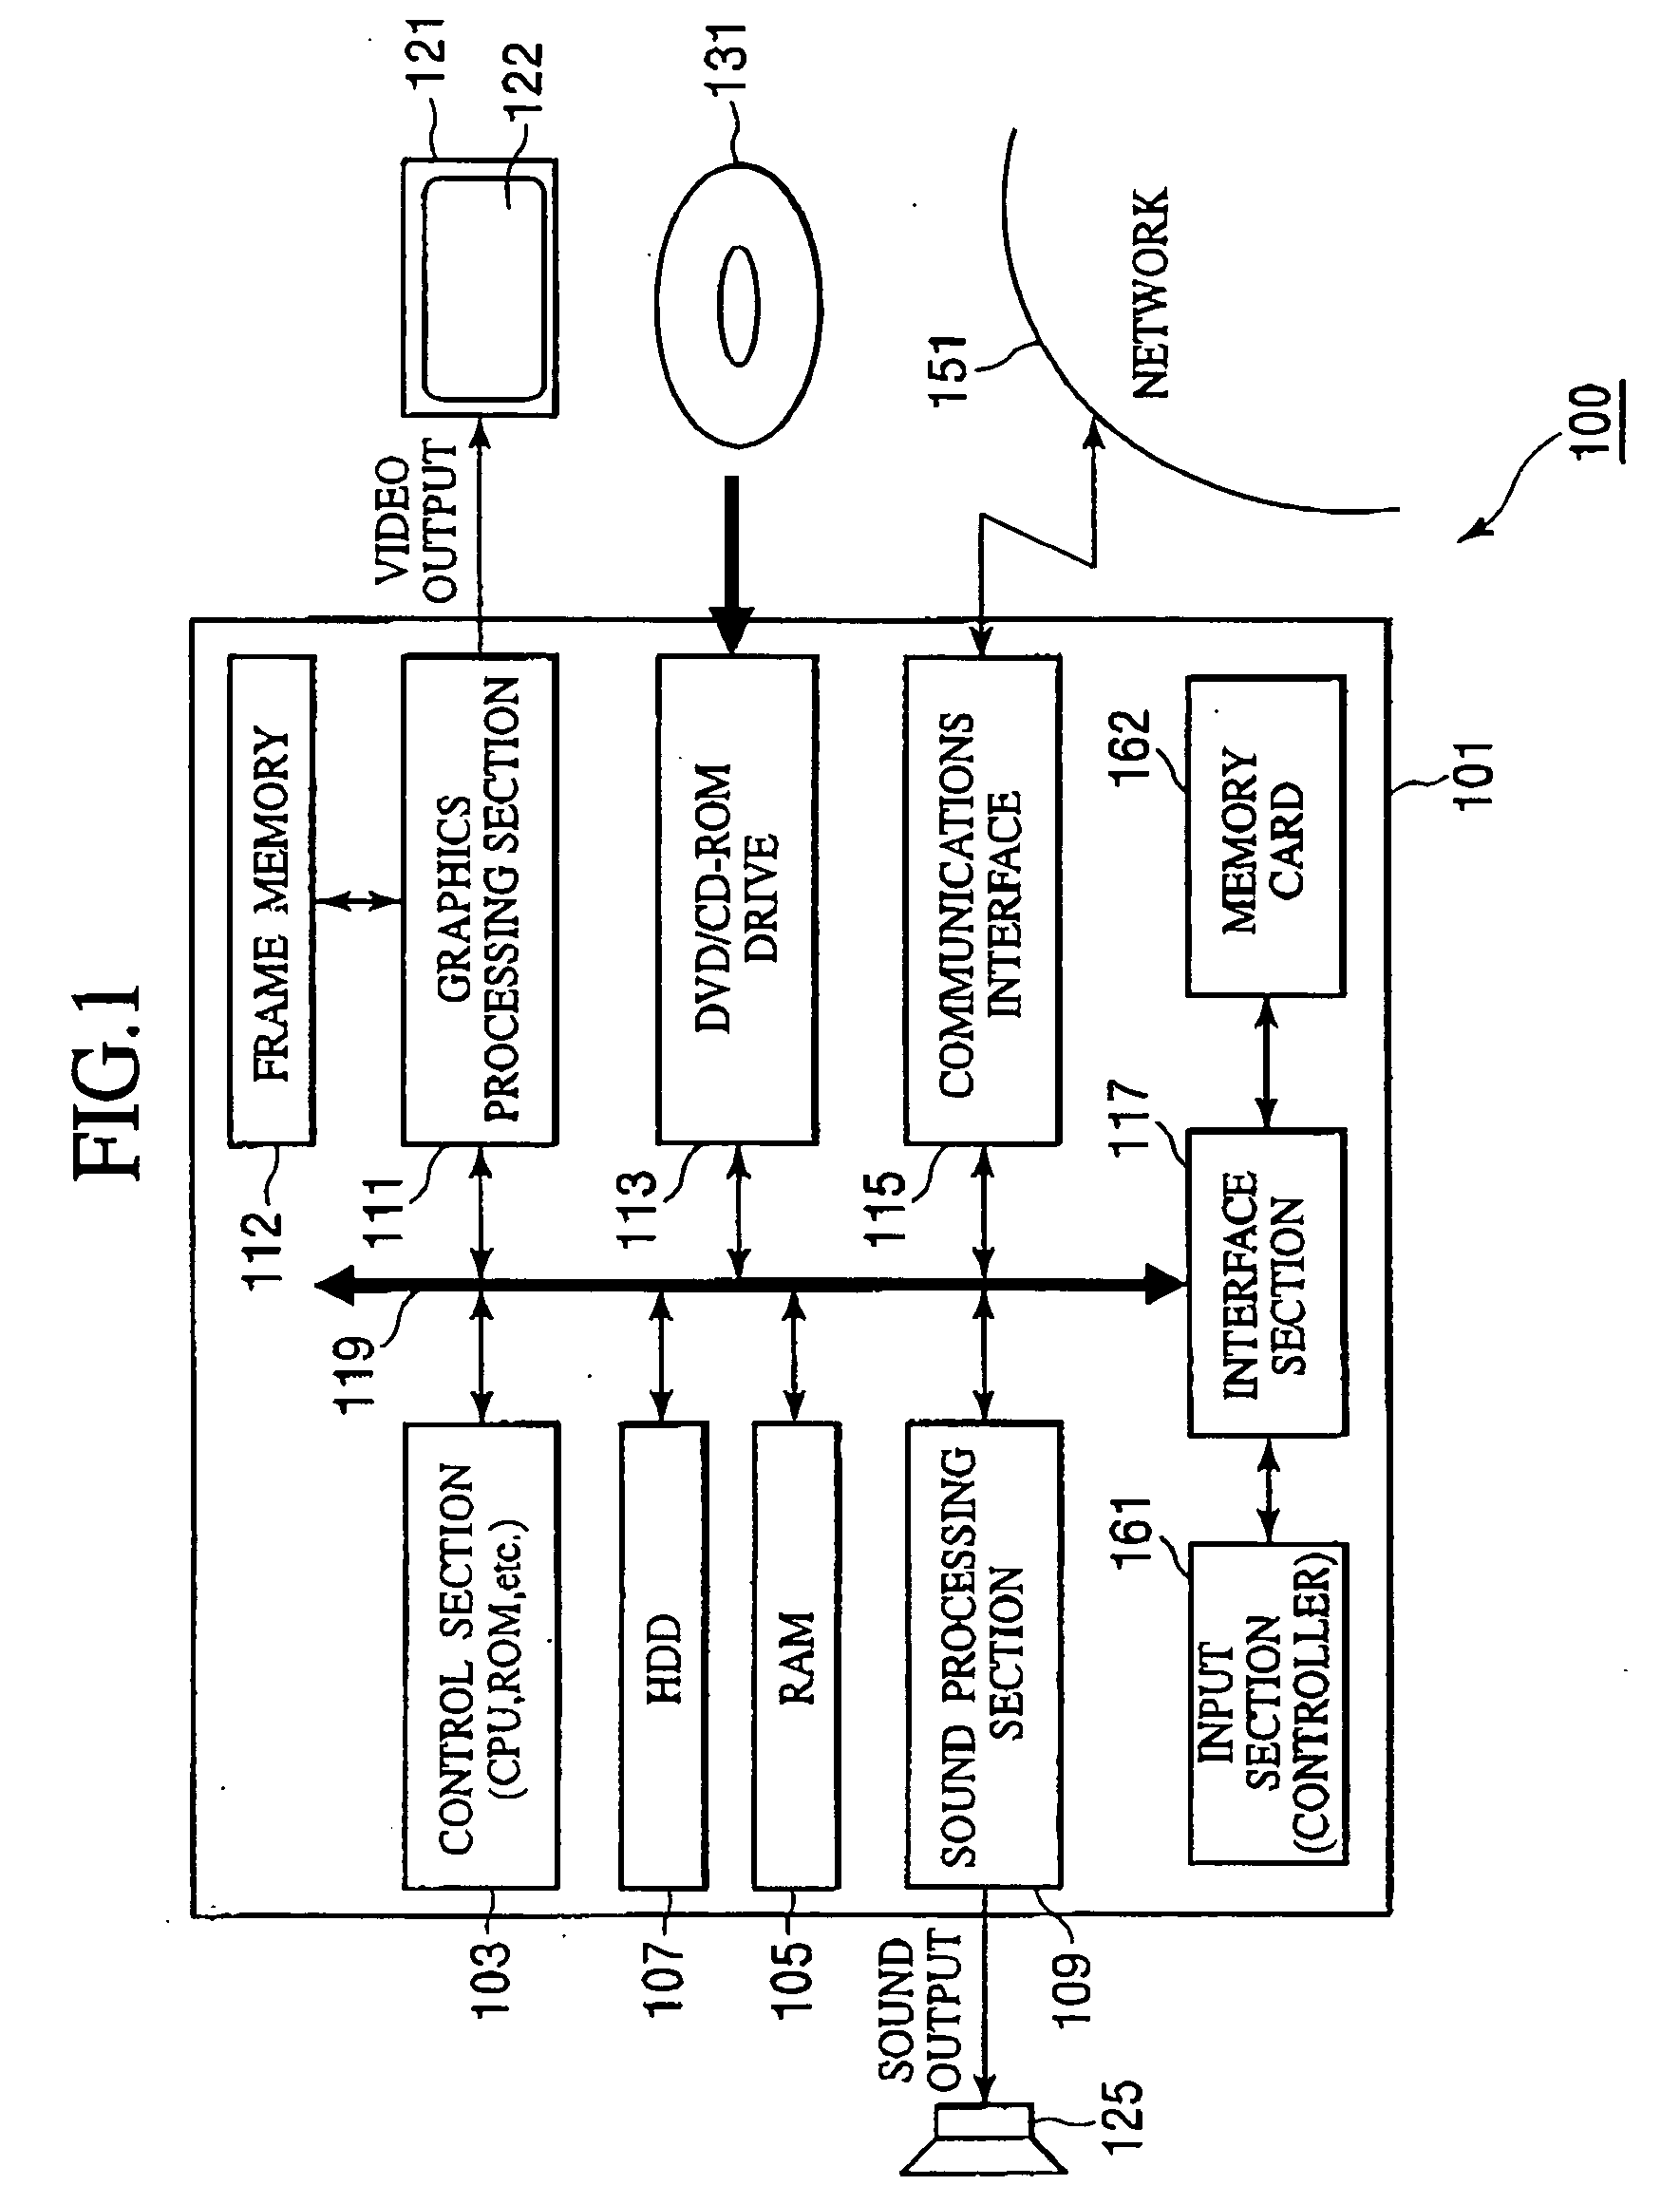 Method for realizing virtual commercial transaction in game